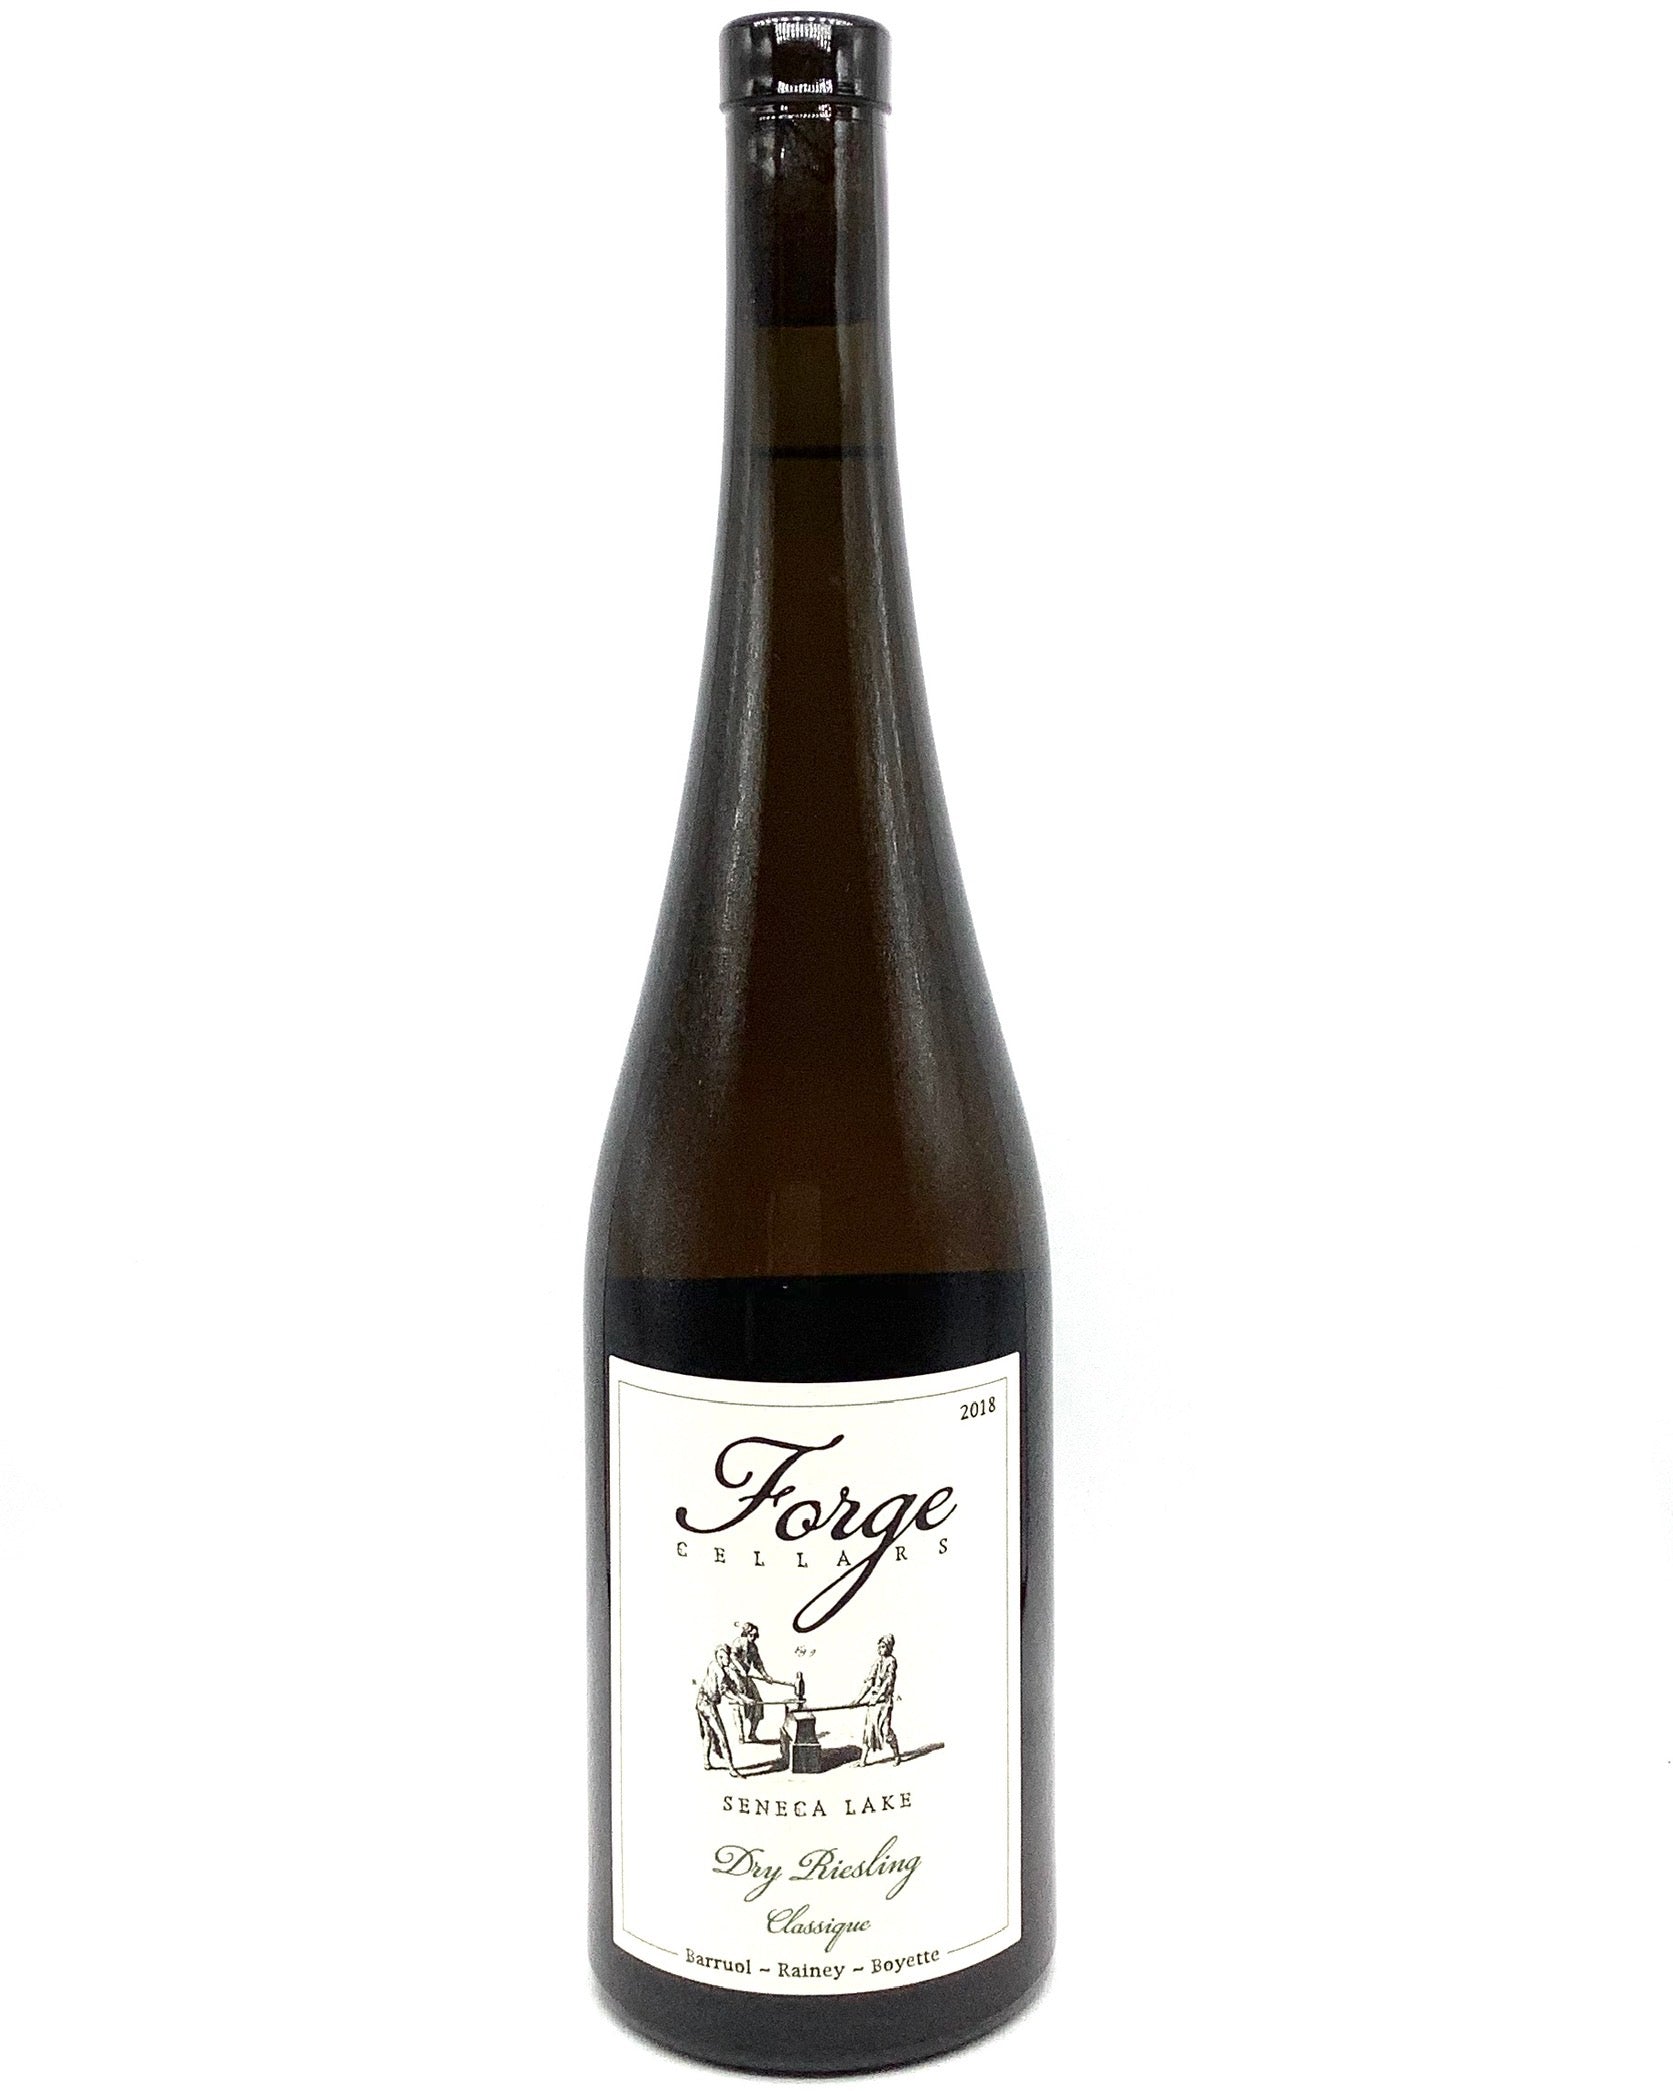 Forge Cellars, Dry Riesling "Classique" Seneca Lake, Finger Lakes, NY 2019